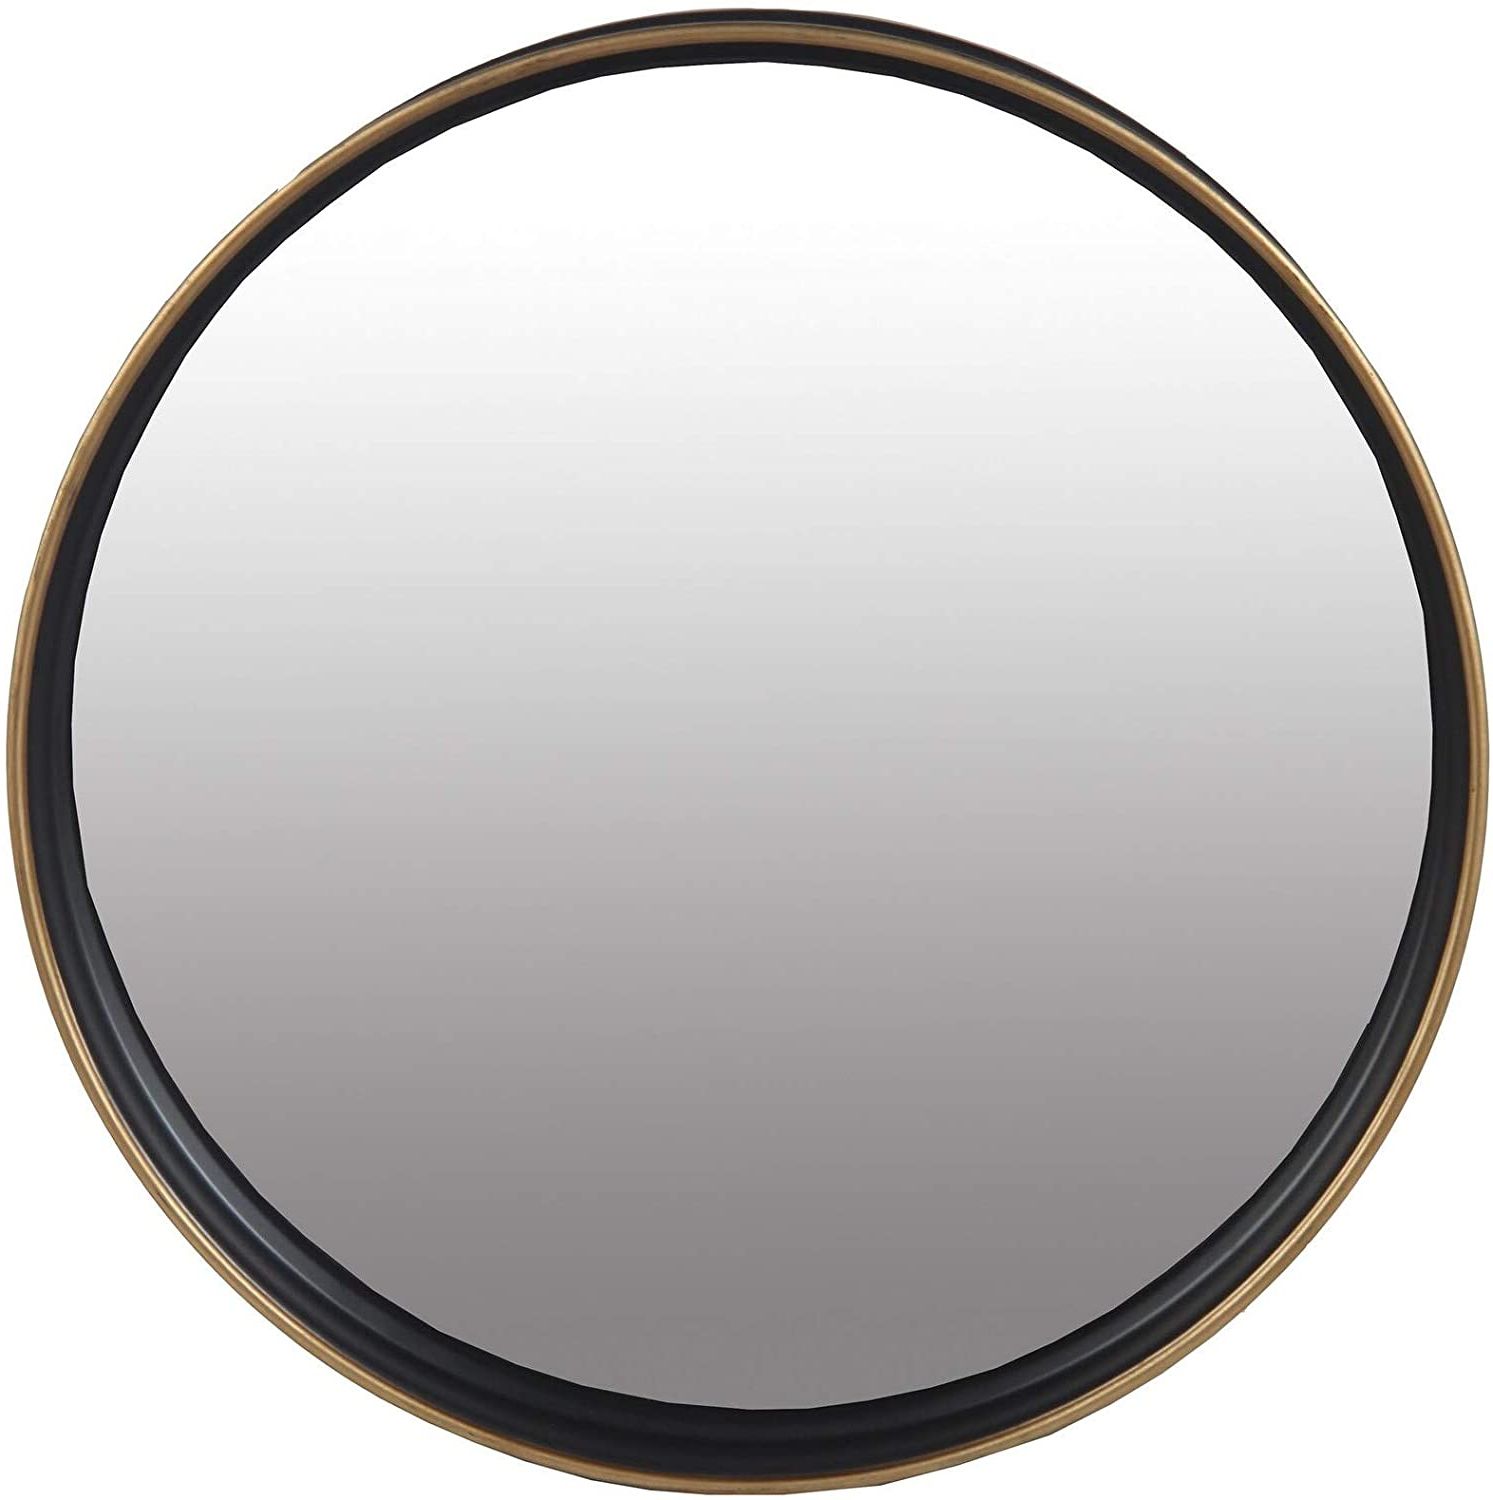 Amazon: Metal Wall Round Mirror With Raised Edges Large Black And Within Most Popular Round Edge Wall Mirrors (View 3 of 15)